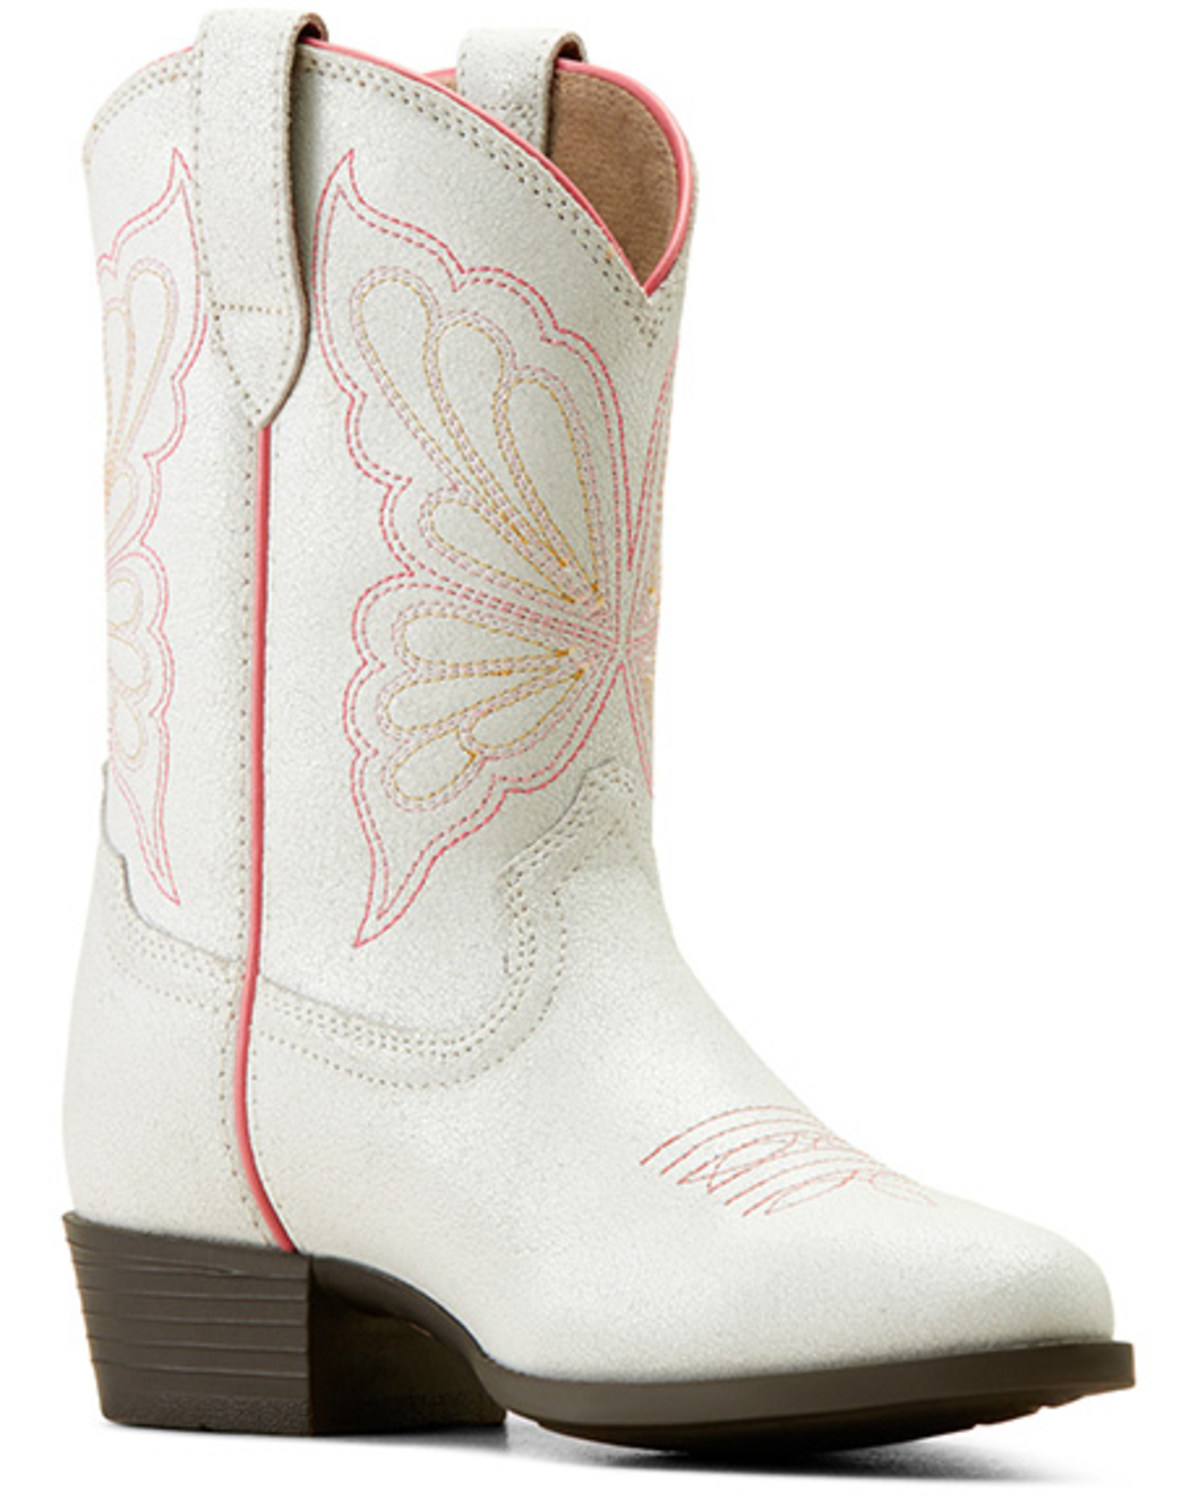 Ariat Girls' Heritage Butterfly Western Boots - Medium Toe